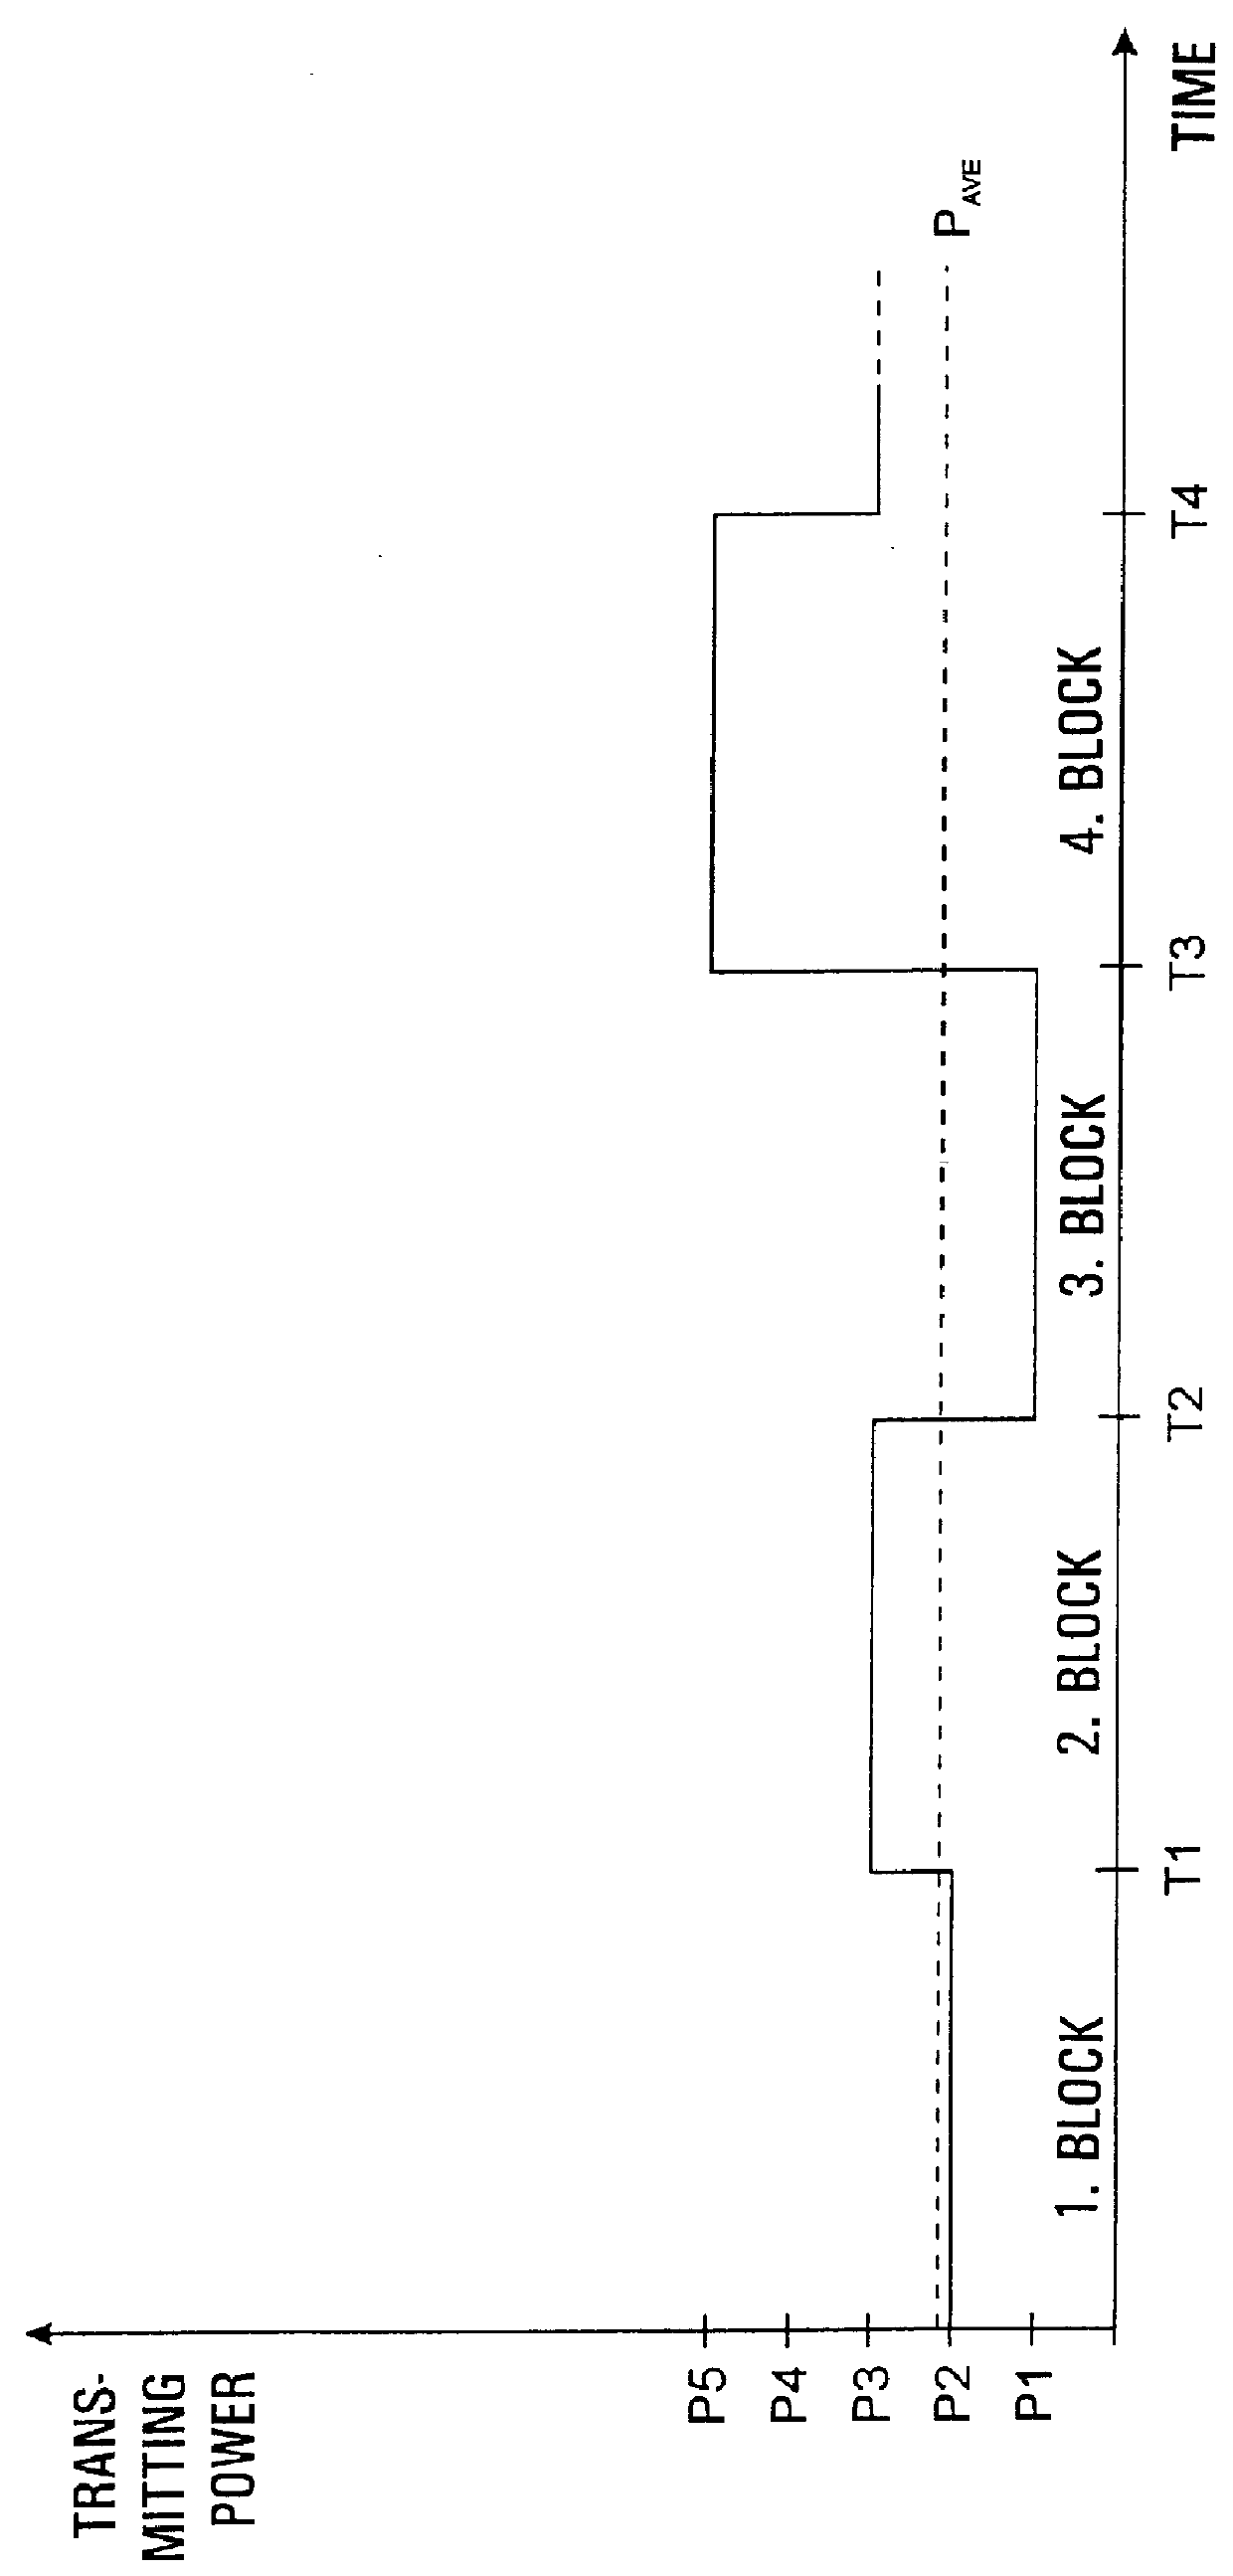 Variable rate circuit-switched transmission services in cellular radio systems